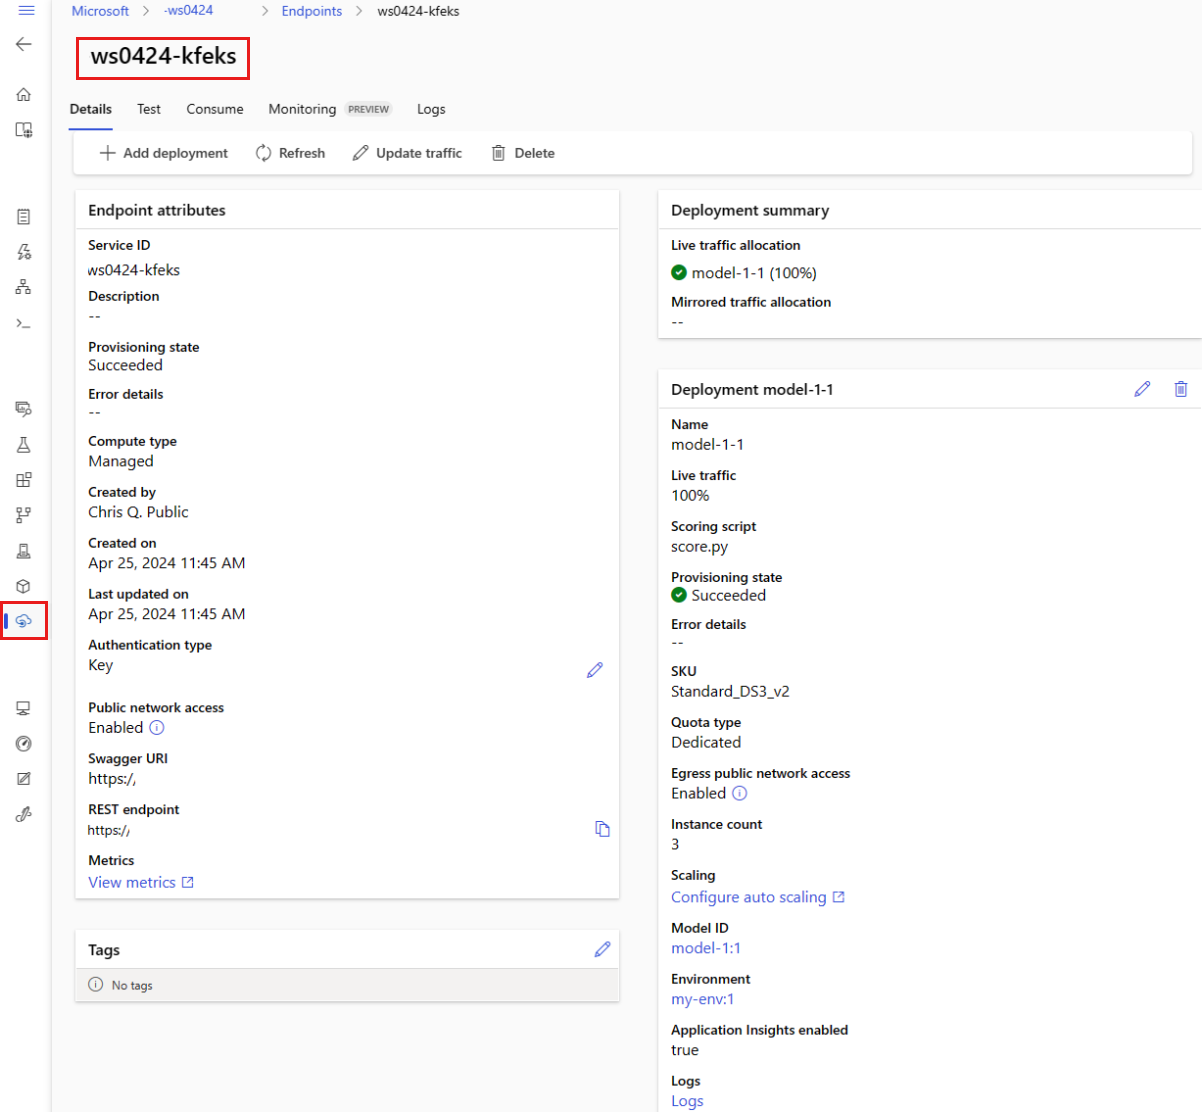 Screenshot of managed endpoint details view.